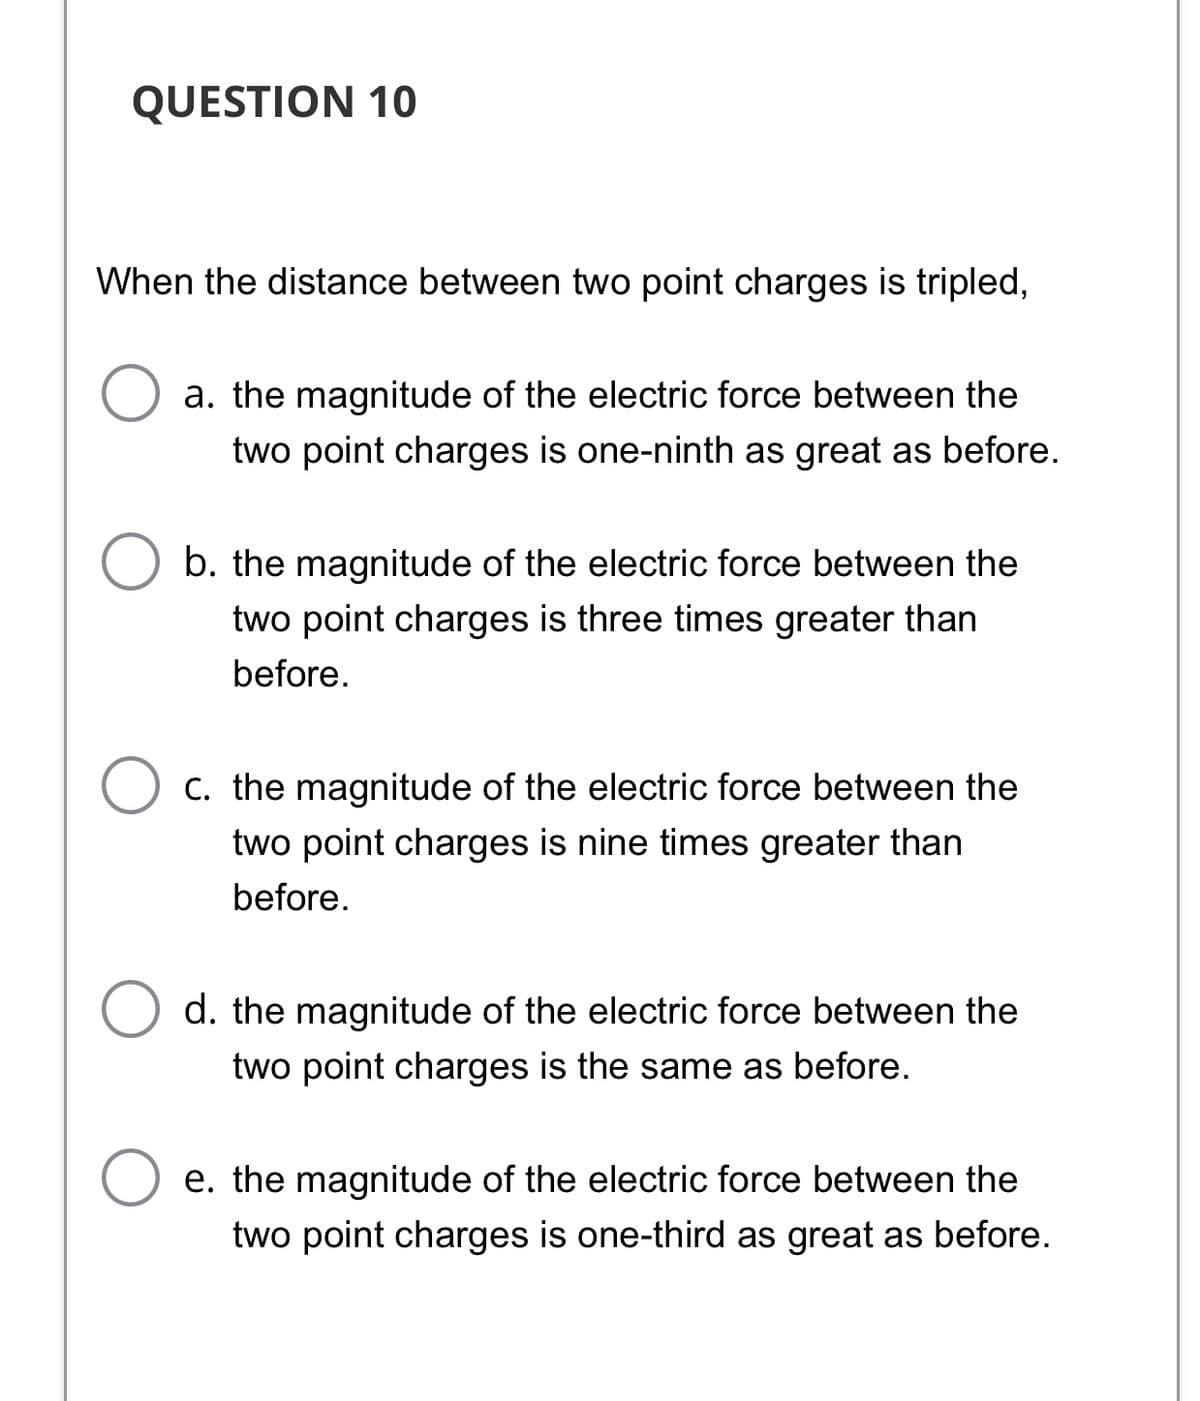 QUESTION 10
When the distance between two point charges is tripled,
a. the magnitude of the electric force between the
two point charges is one-ninth as great as before.
b. the magnitude of the electric force between the
two point charges is three times greater than
before.
C. the magnitude of the electric force between the
two point charges is nine times greater than
before.
d. the magnitude of the electric force between the
two point charges is the same as before.
e. the magnitude of the electric force between the
two point charges is one-third as great as before.
